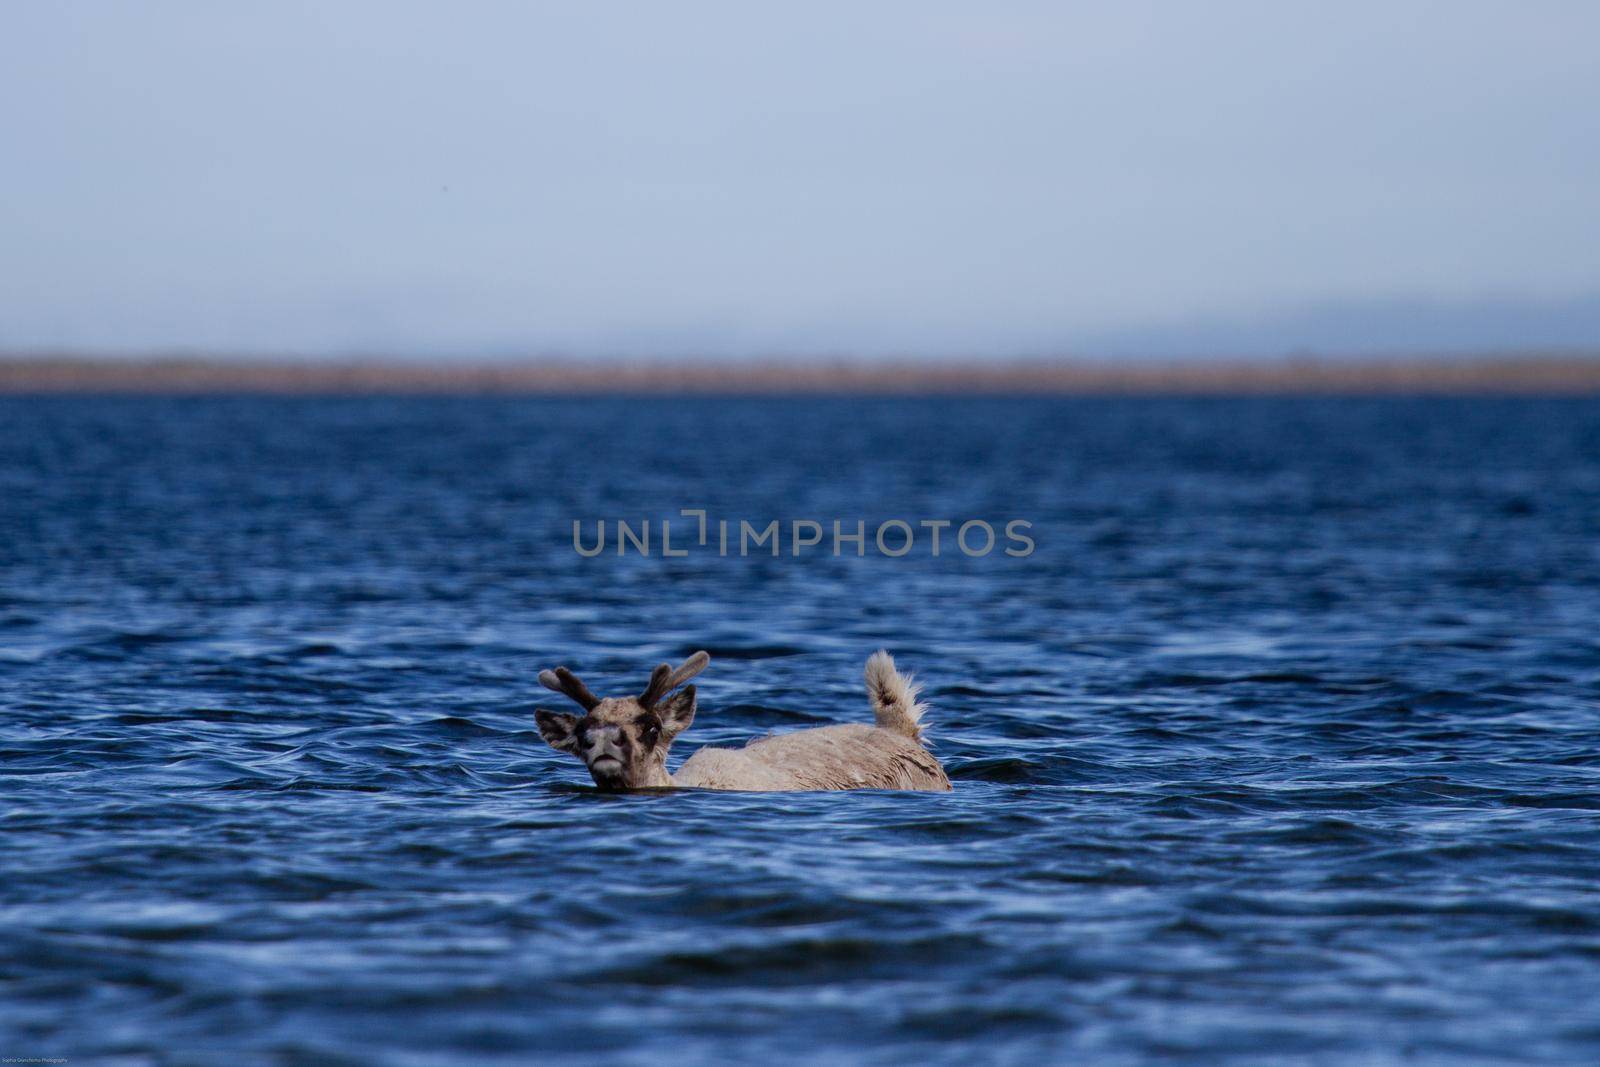 Young barren-ground caribou swimming through water by Granchinho